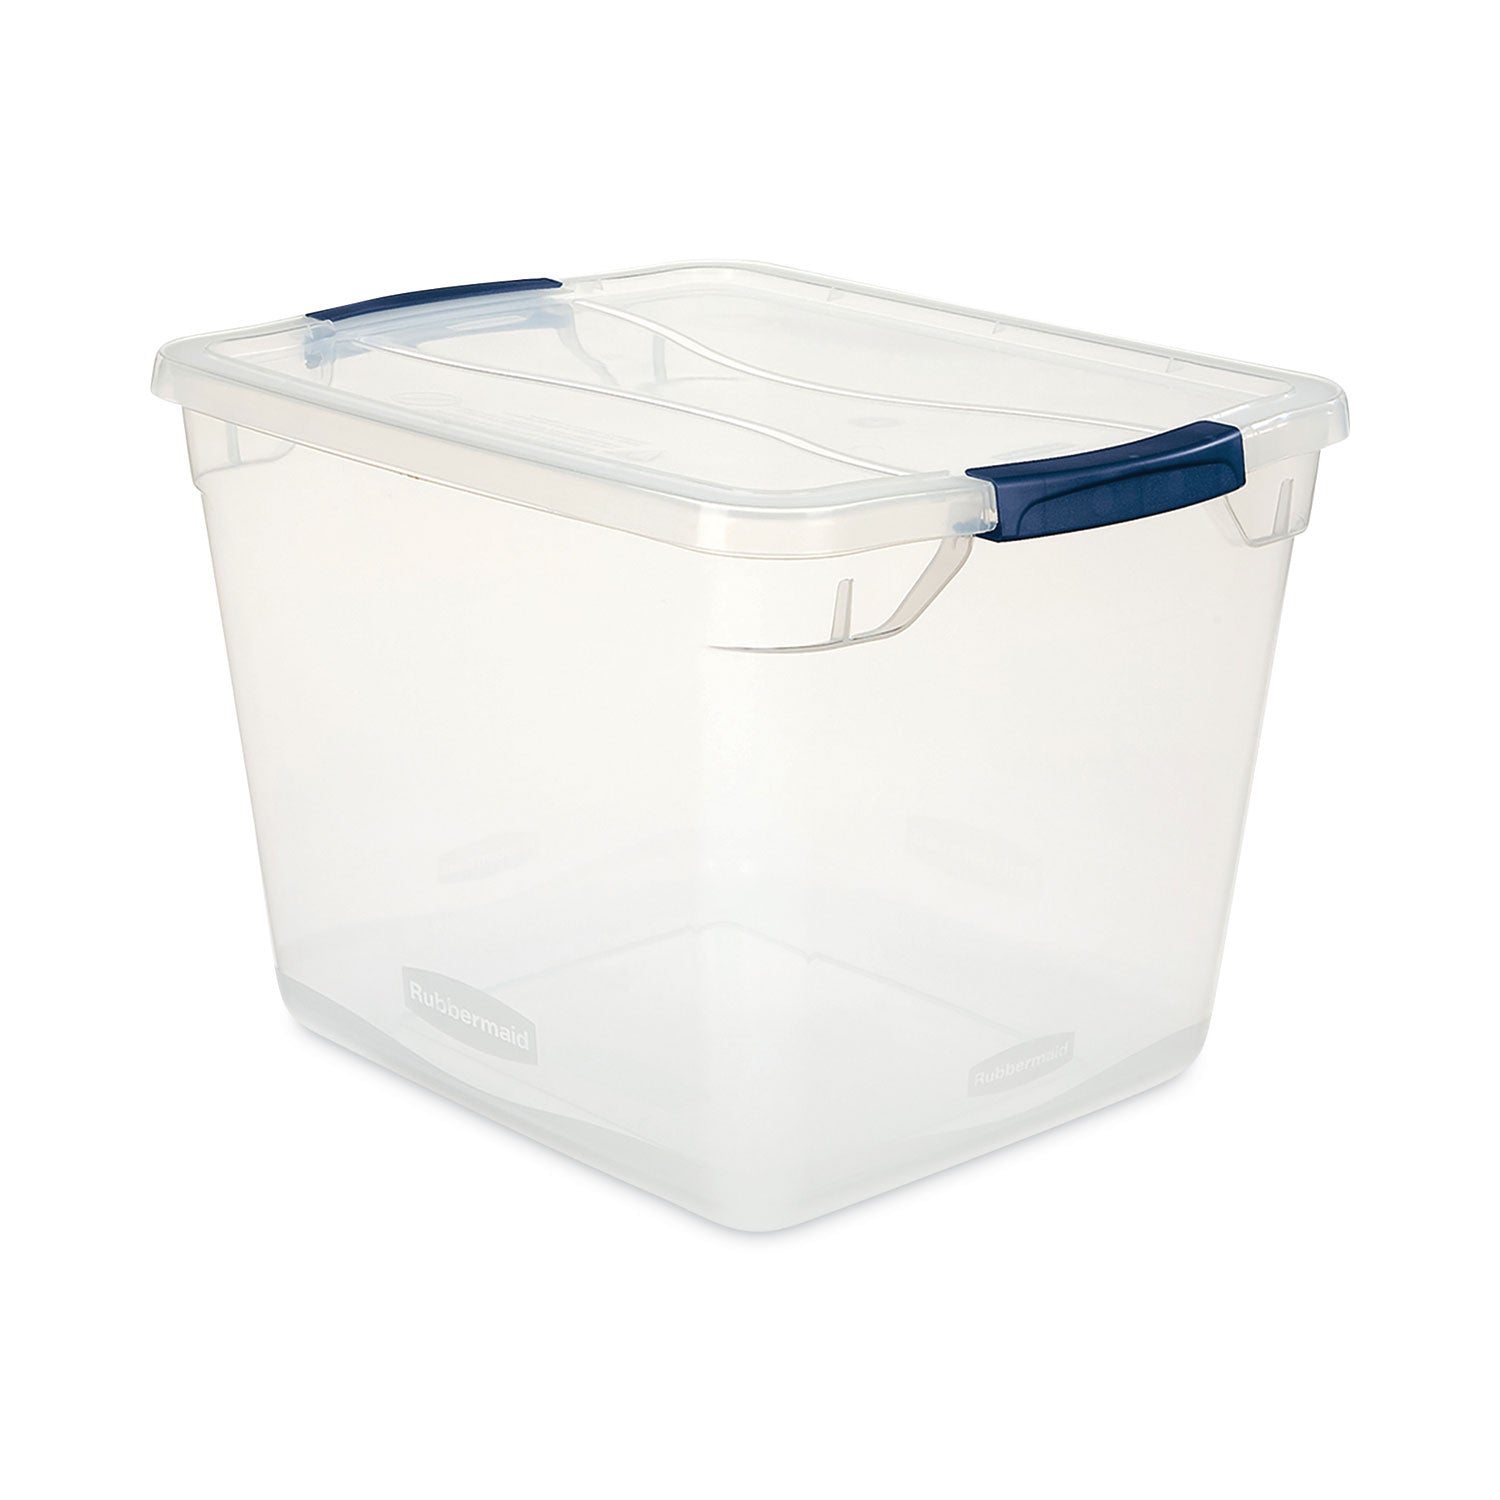 clever-store-basic-latch-lid-container-30-qt-1337-x-1875-x-105-clear_unxrmcc300014 - 1